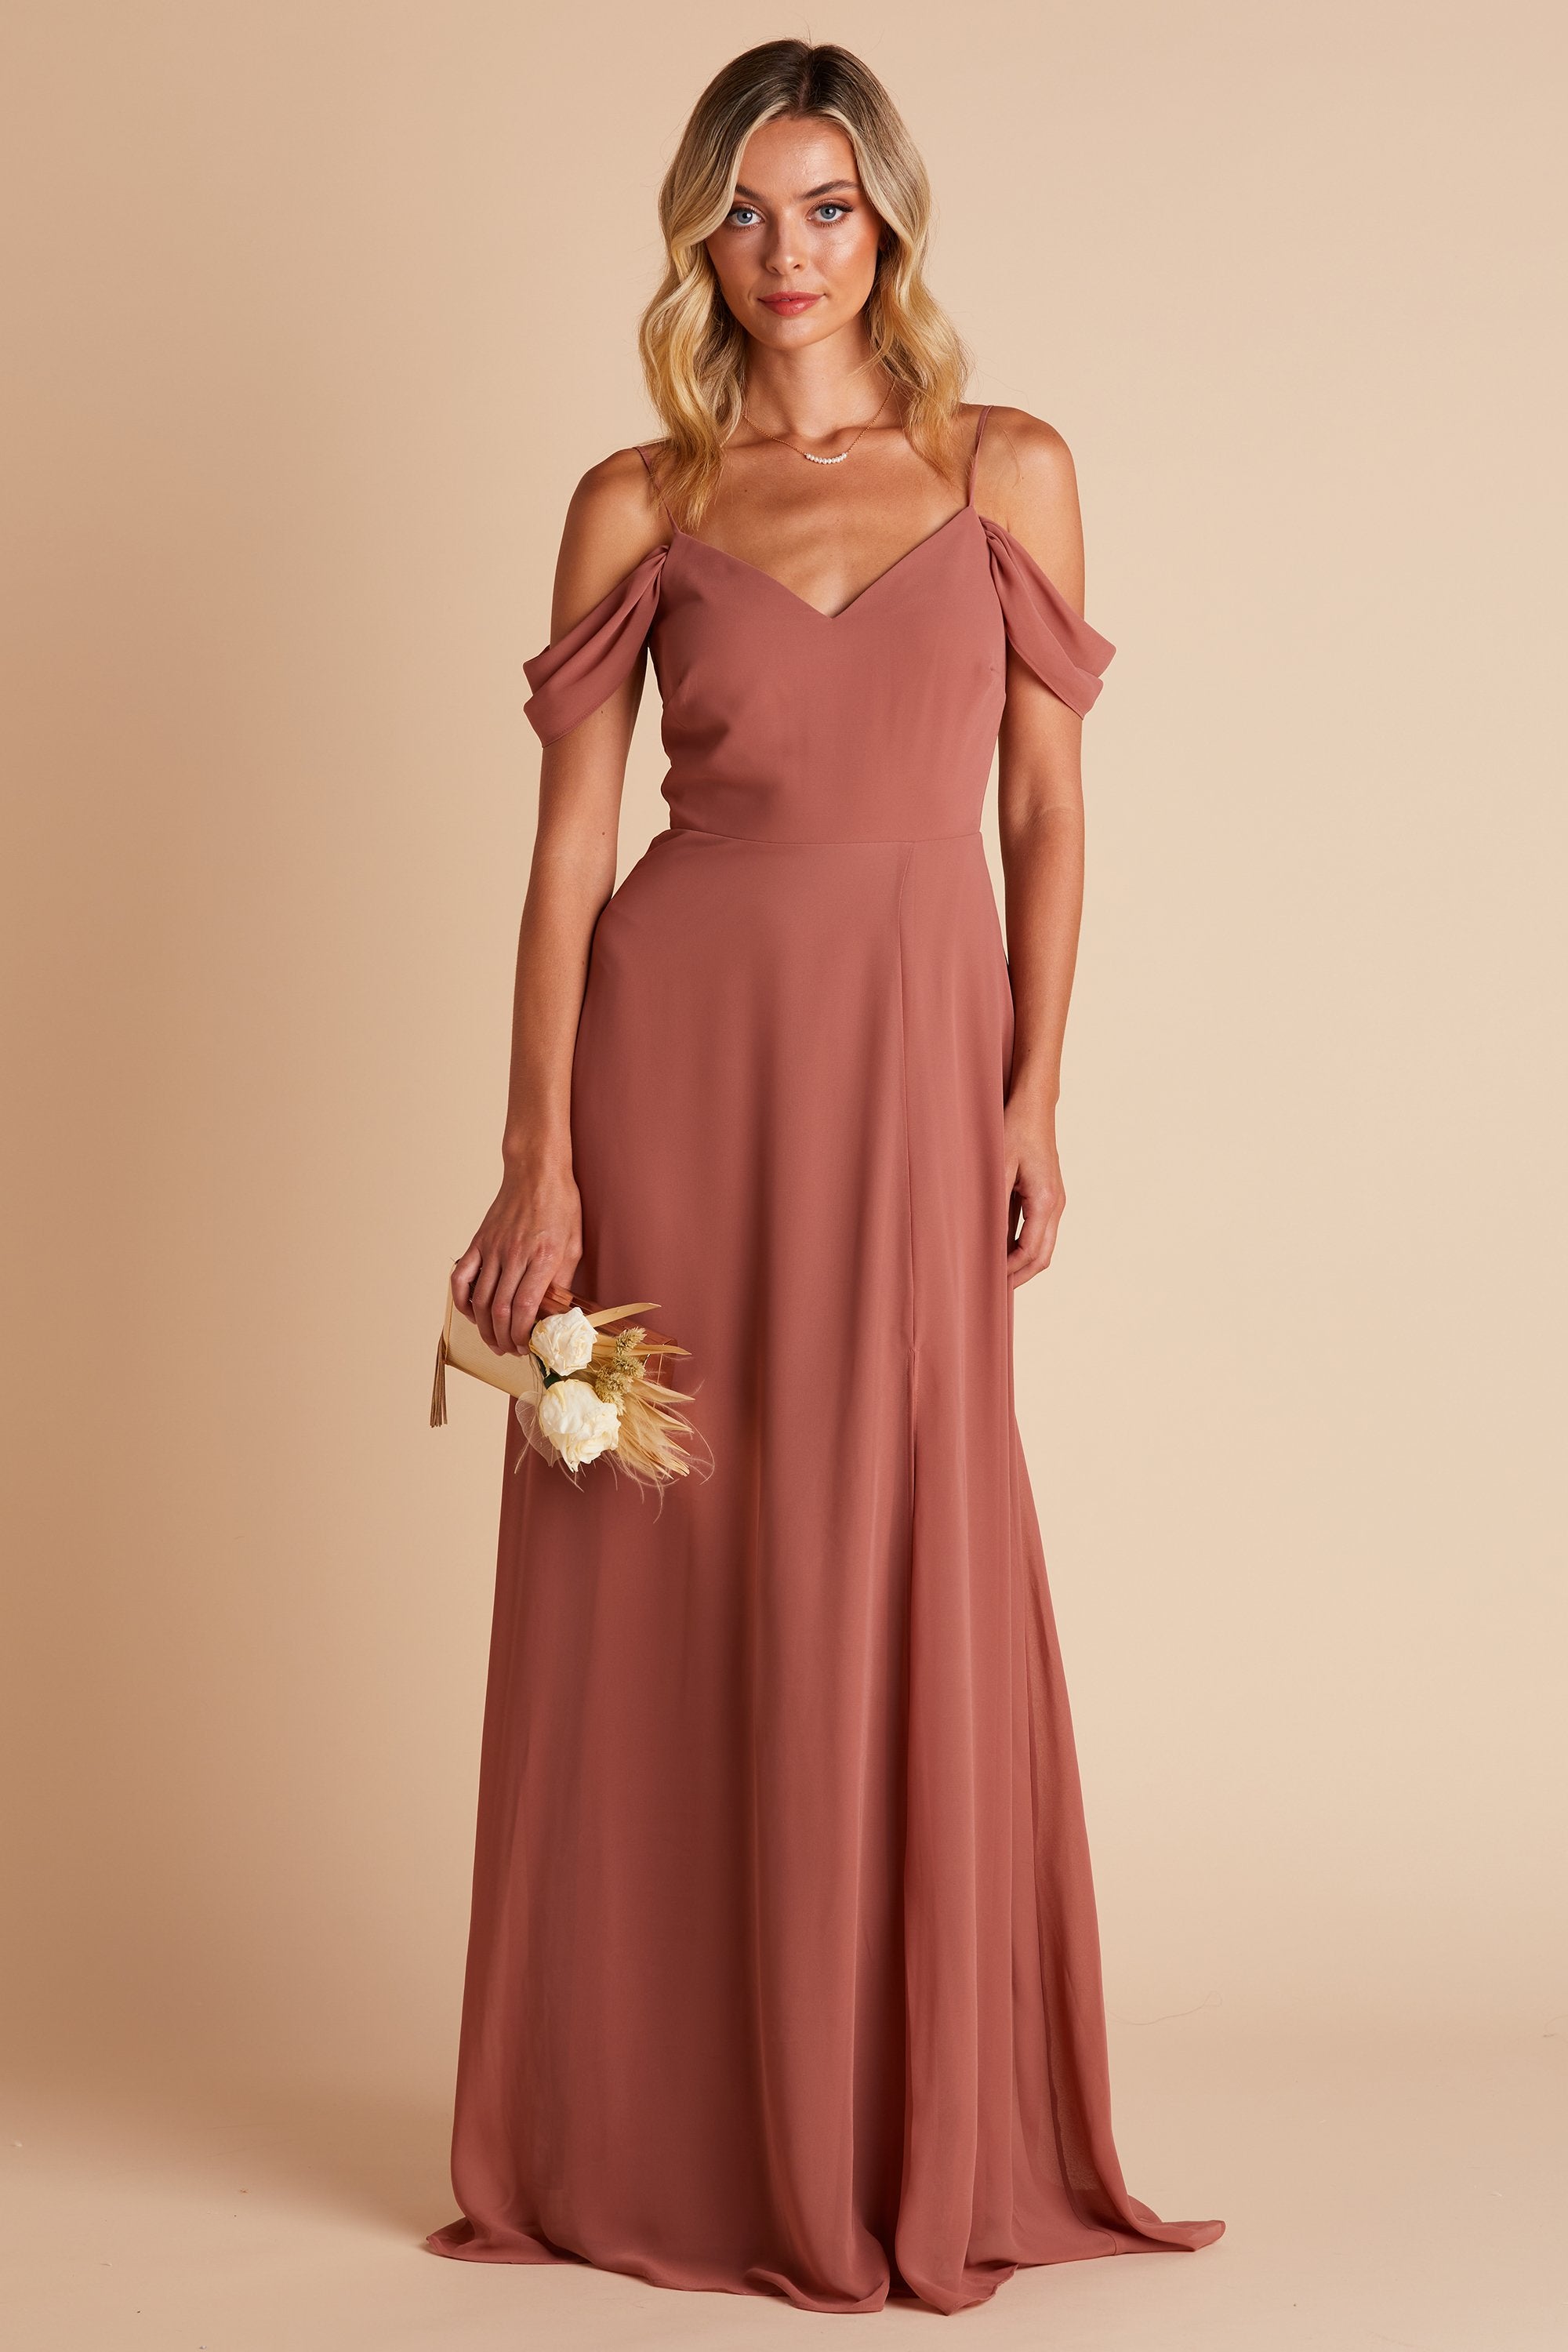 Front view of the Devon Convertible Dress in desert rose chiffon worn by a slender model with a light skin tone. 